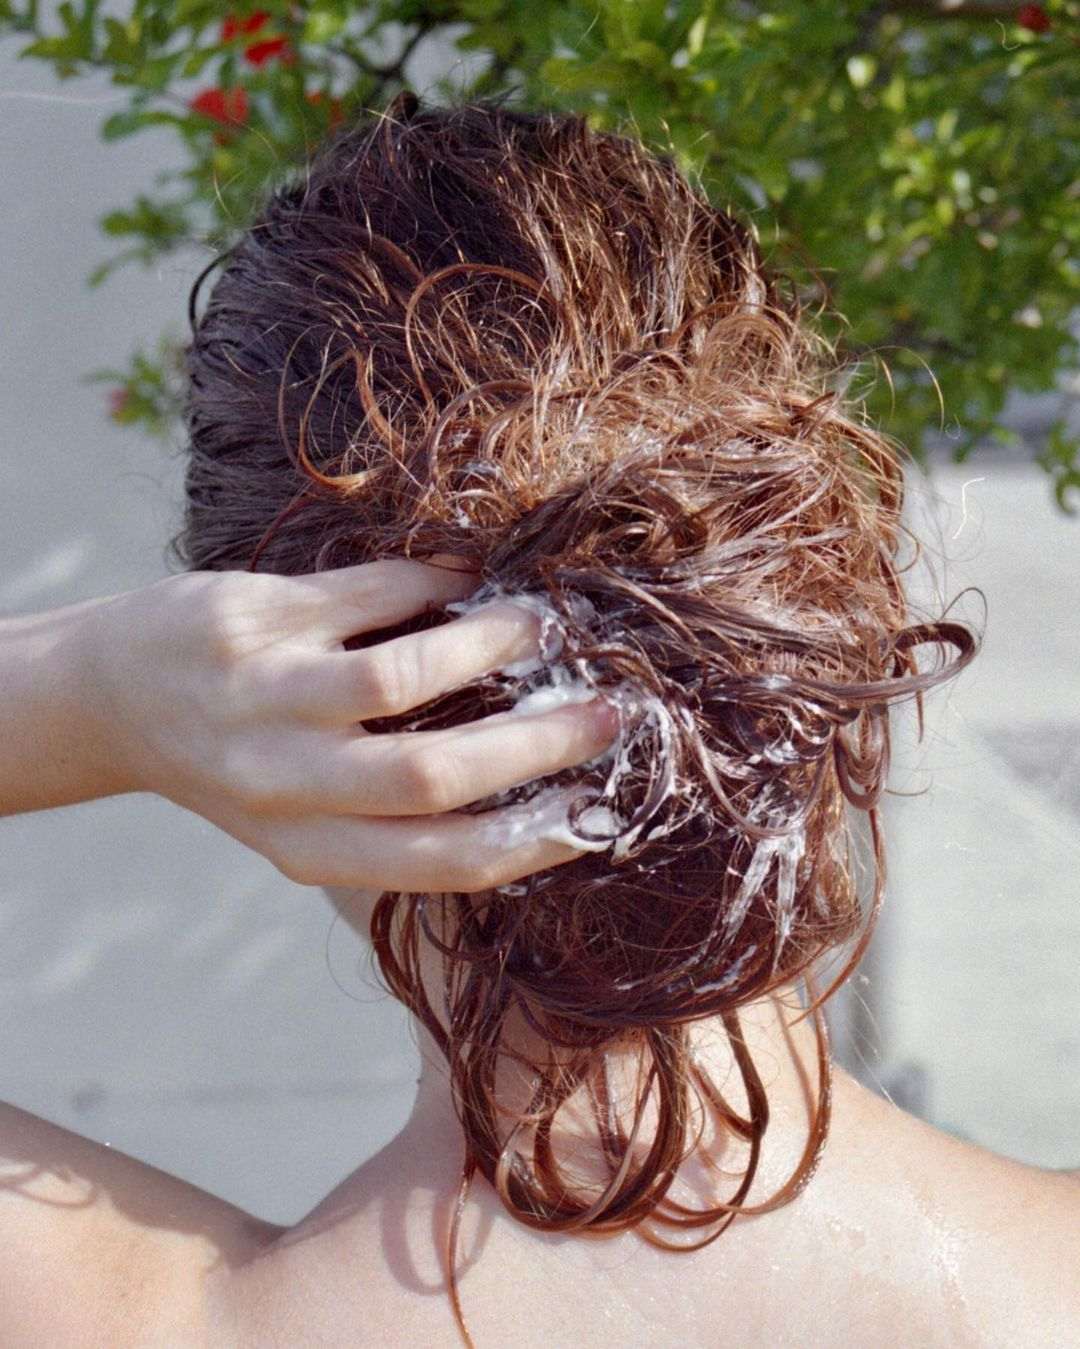 Top 48 image is salt water good for your hair 